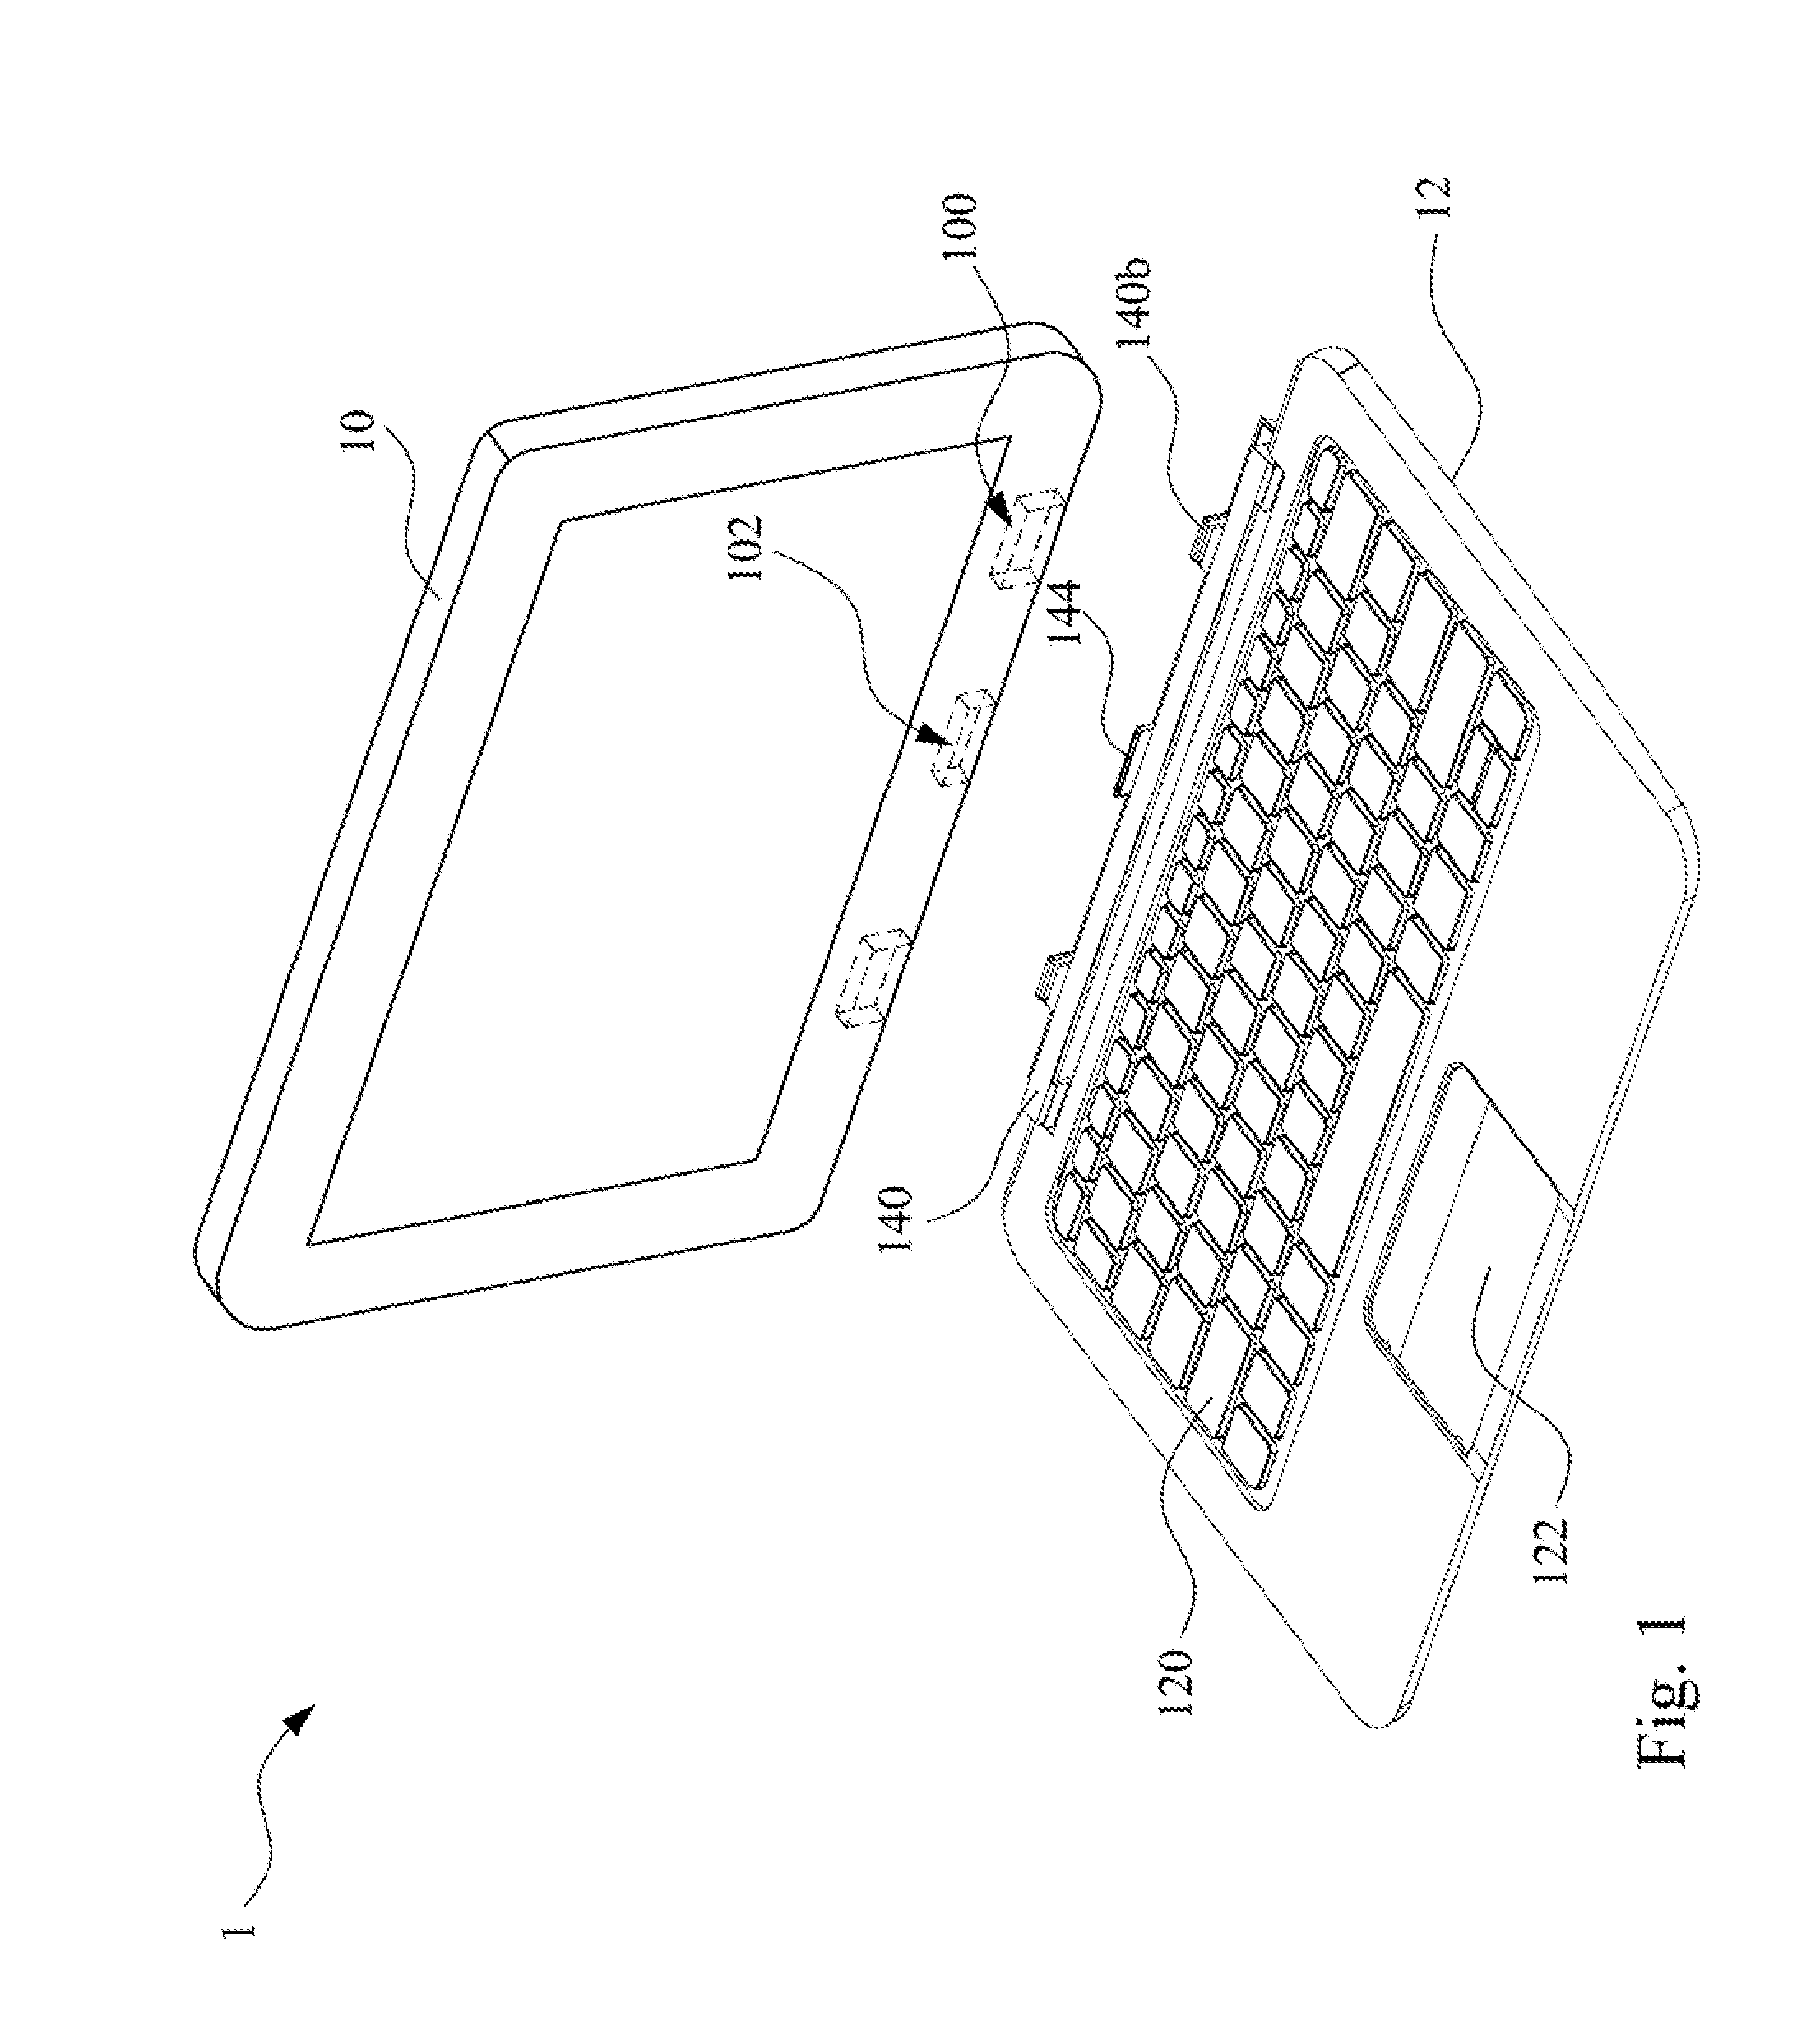 Docking station and electronic apparatus